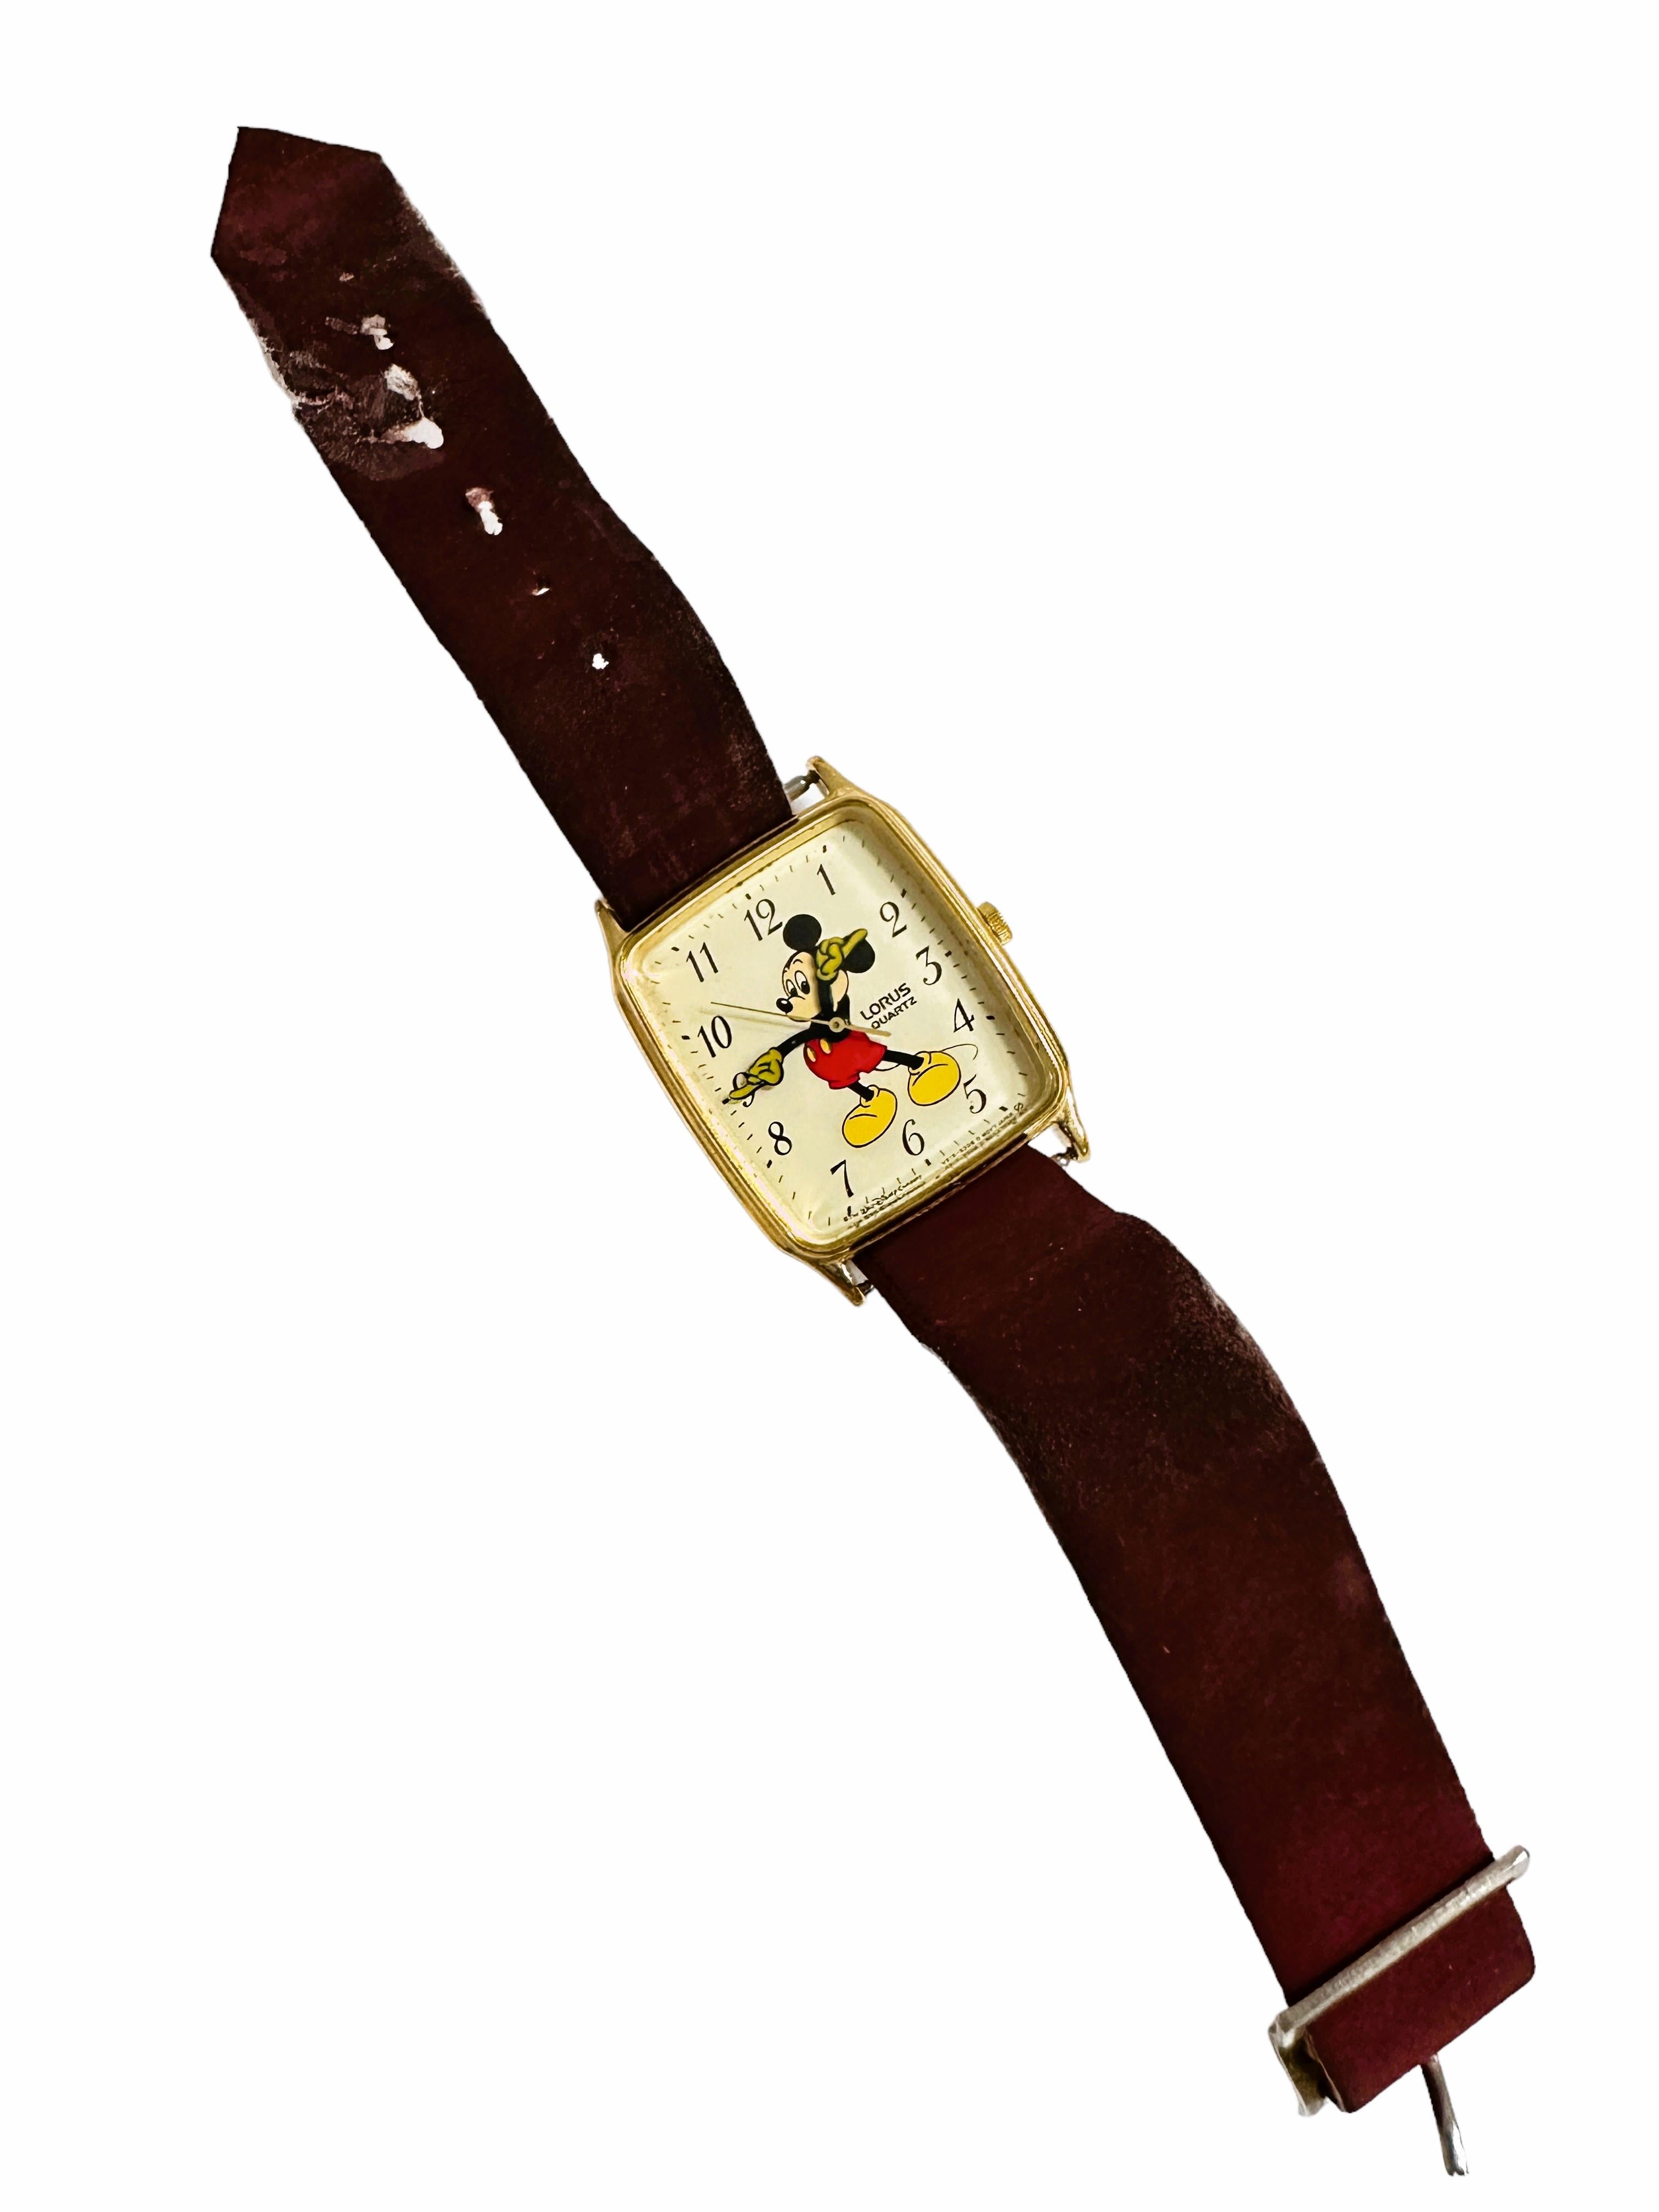 This vintage Lorus/Seiko wristwatch features a charming Disney Mickey Mouse design on a gold dial housed in a gold stainless steel rectangle case
 measuring 36 x 26 mm.  Rectangle cases are not very common.  Most of these come in round cases. The